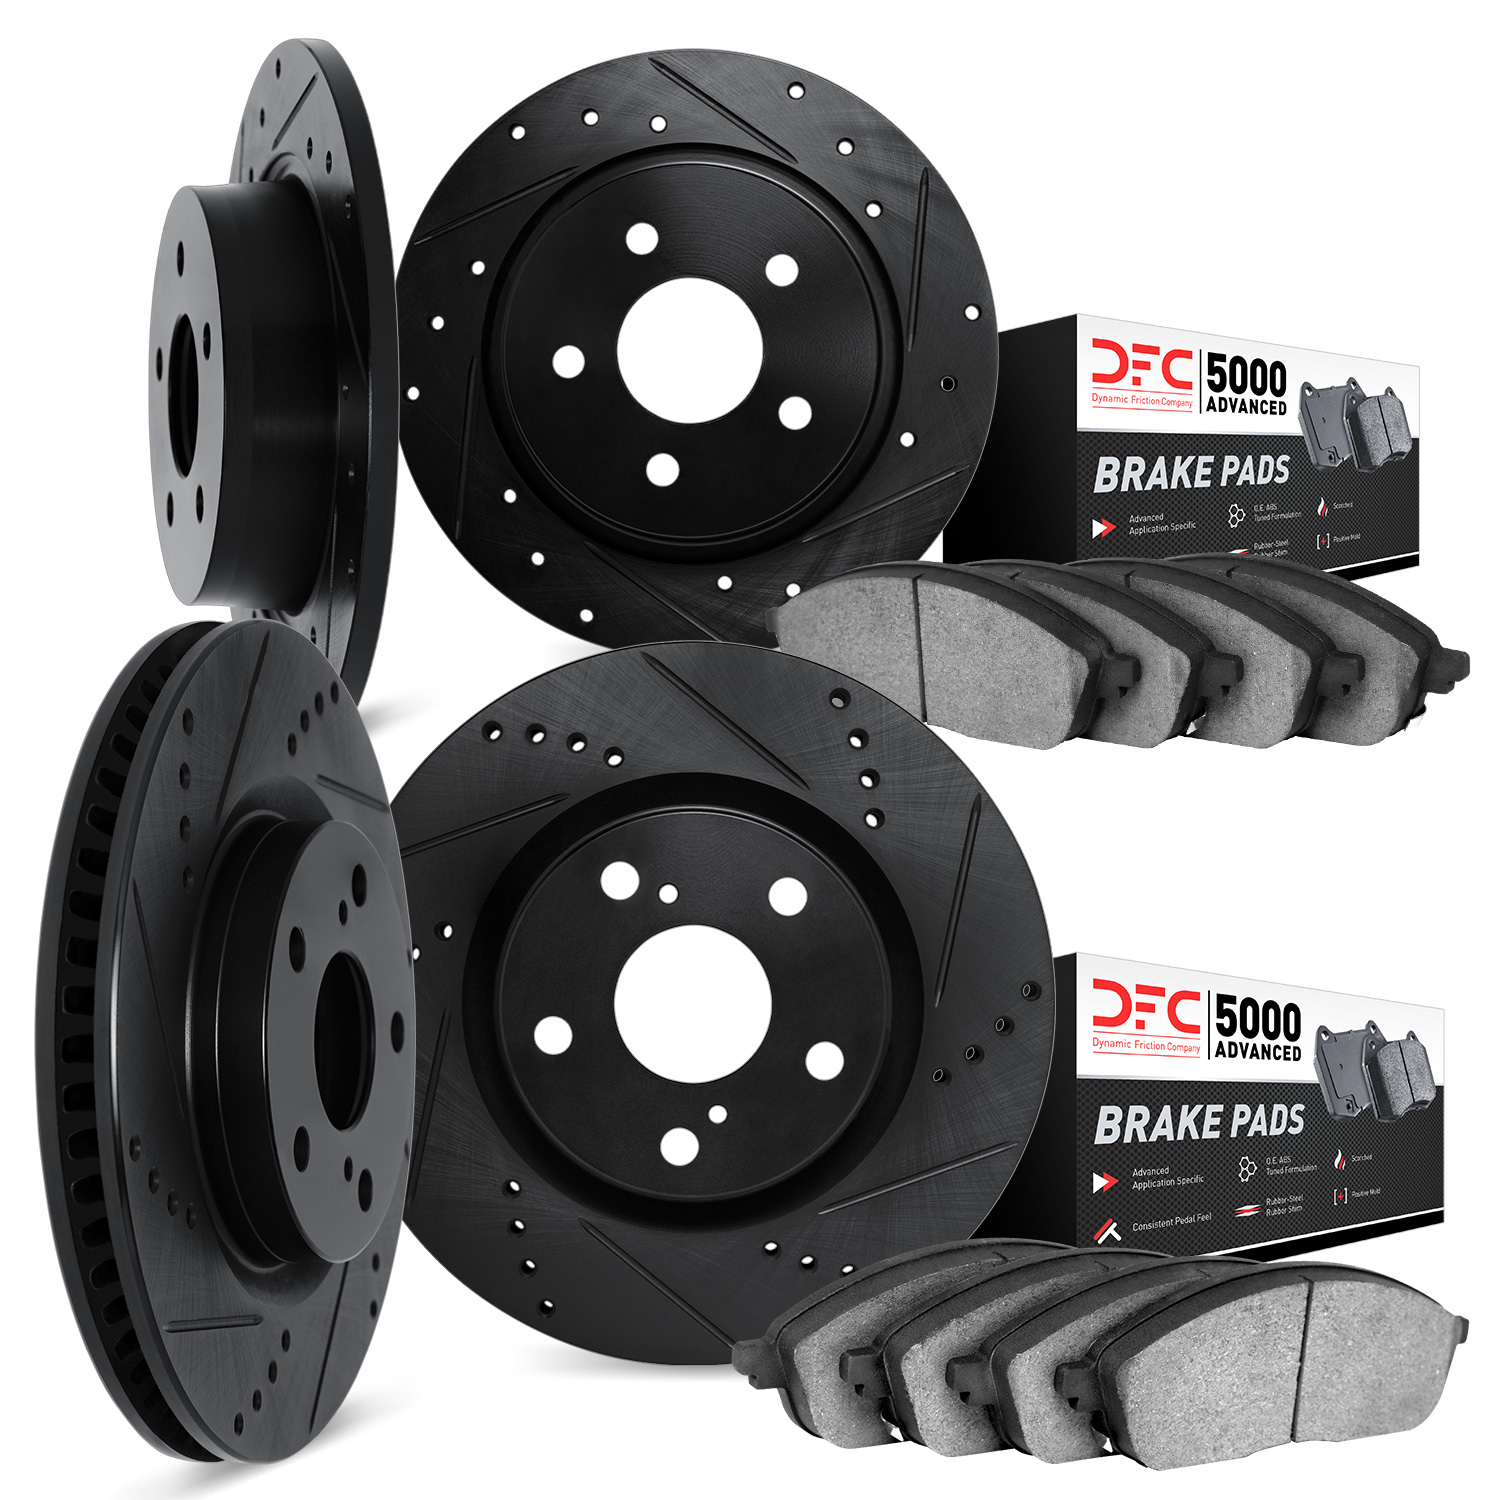 8504-76151 Drilled/Slotted Brake Rotors w/5000 Advanced Brake Pads Kit [Black], 2002-2003 Lexus/Toyota/Scion, Position: Front an